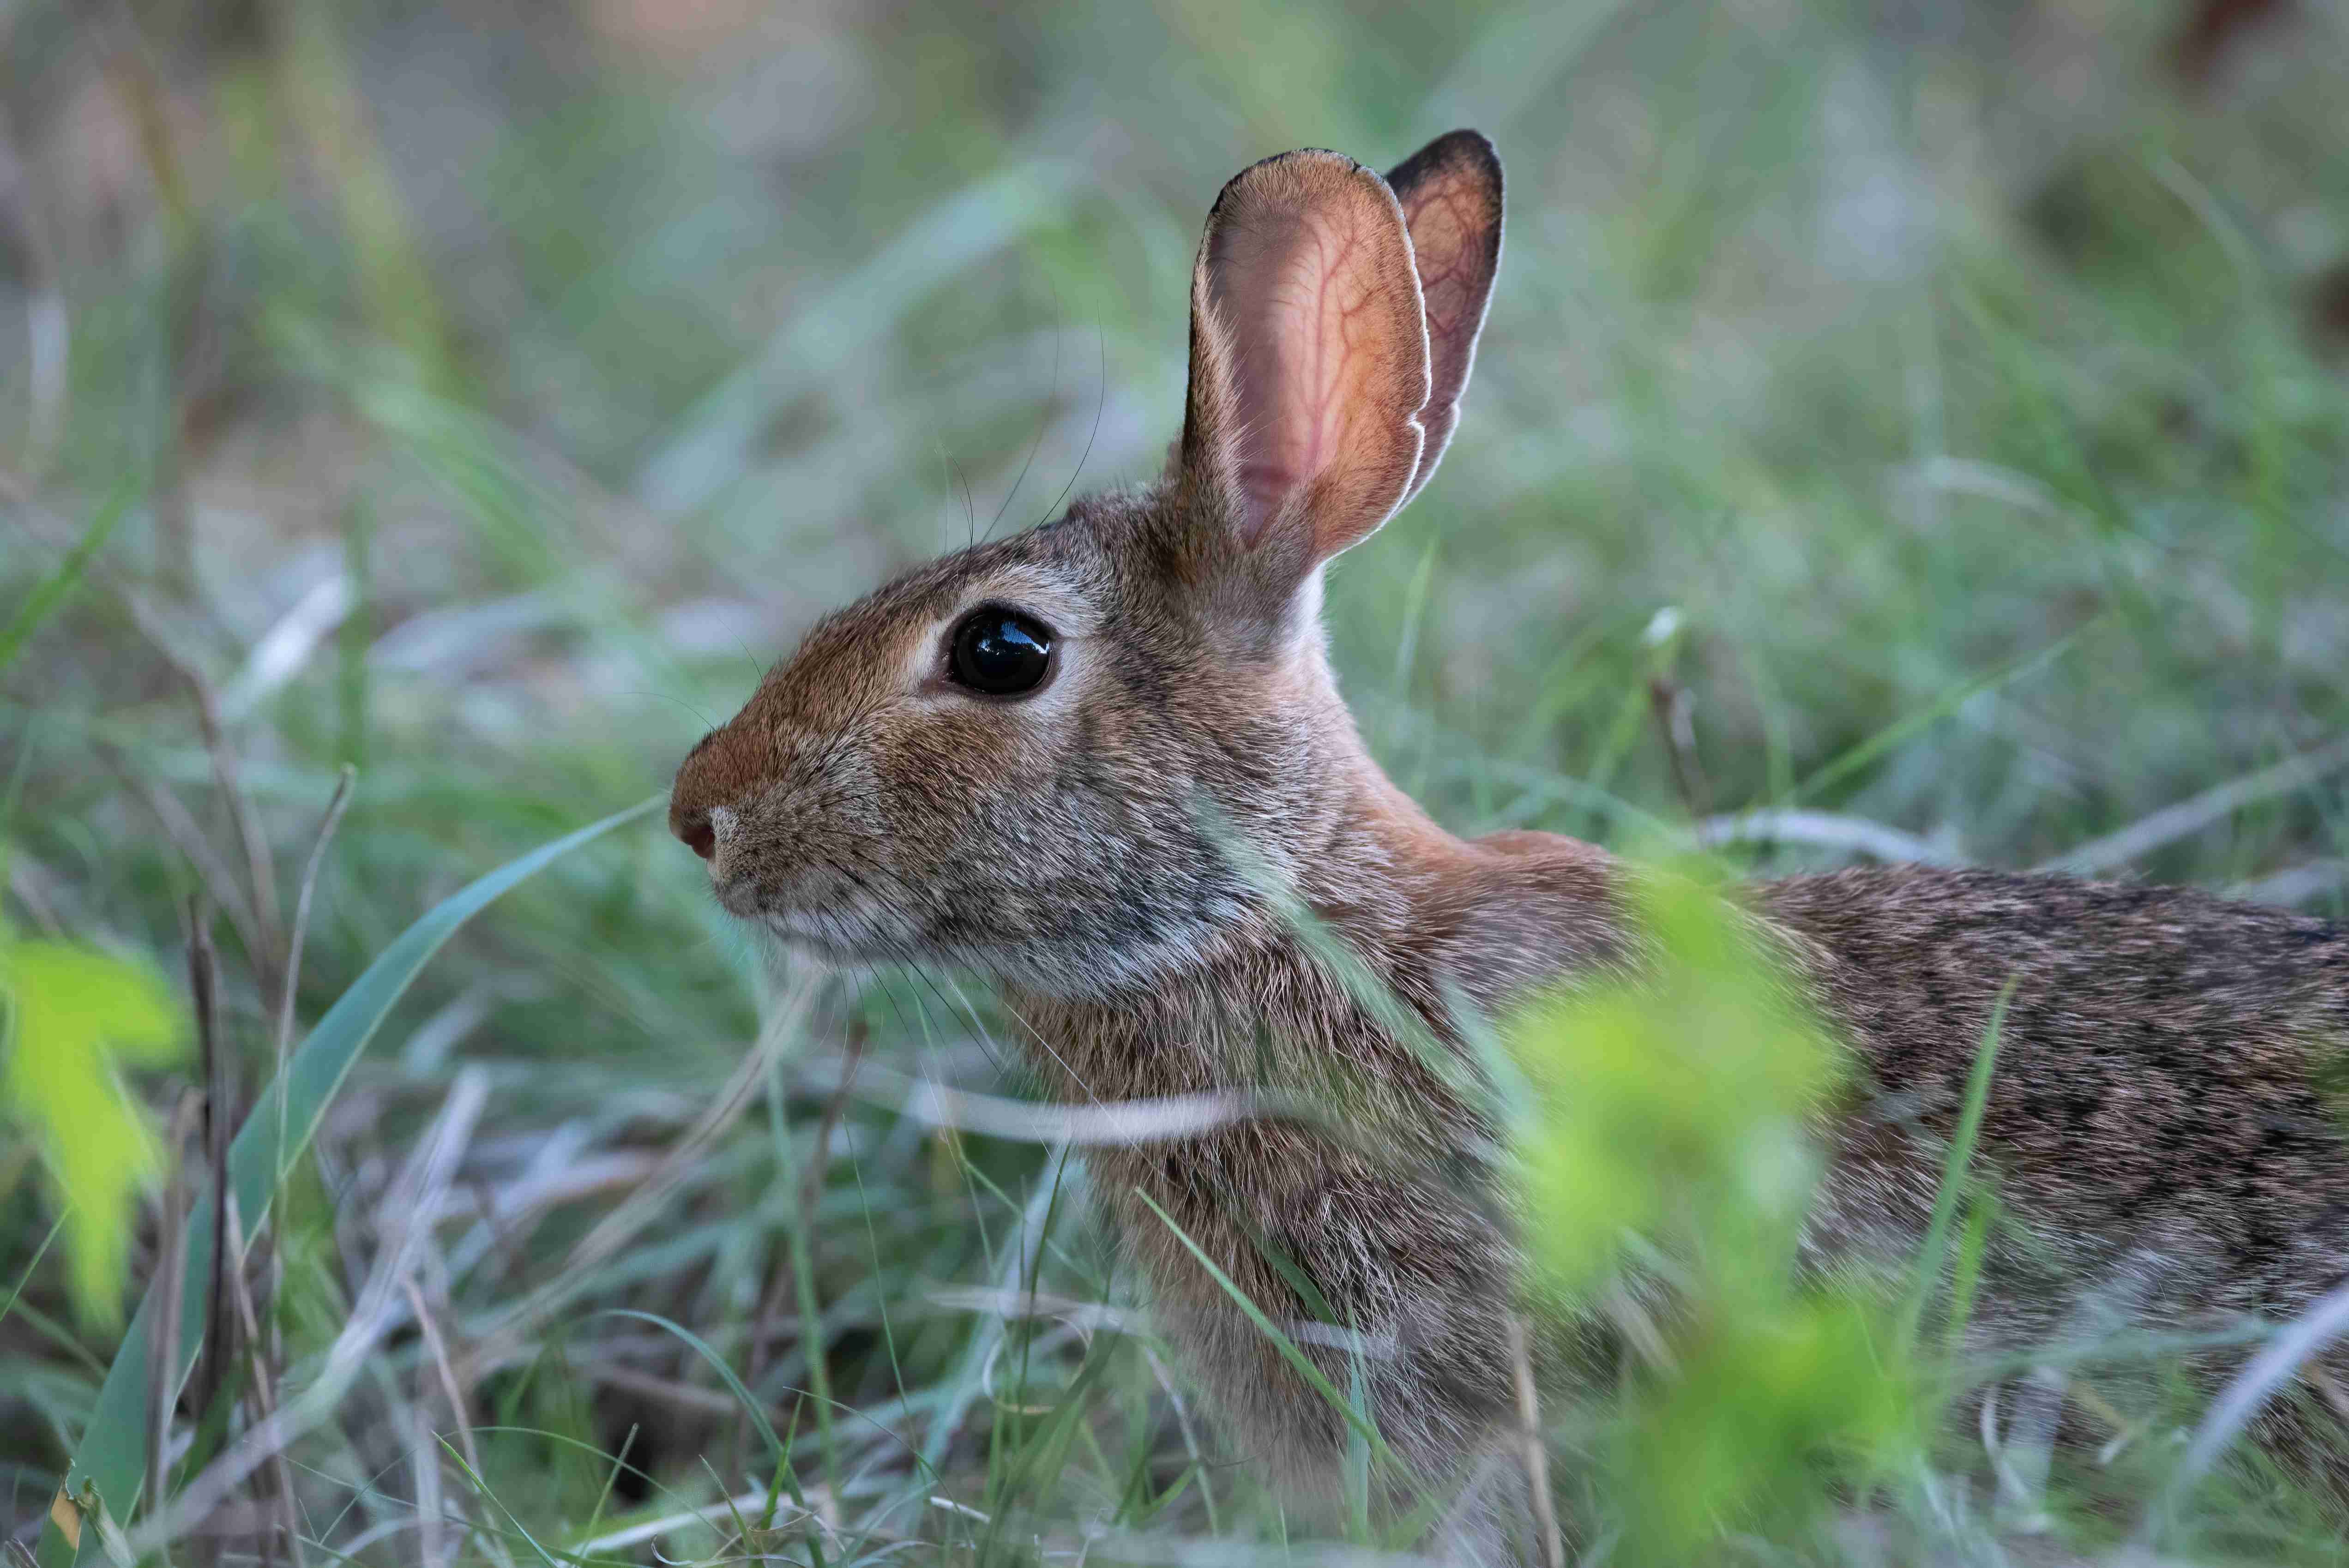 Ear-Resistible: A Guide to Common Ear Problems in Rabbits